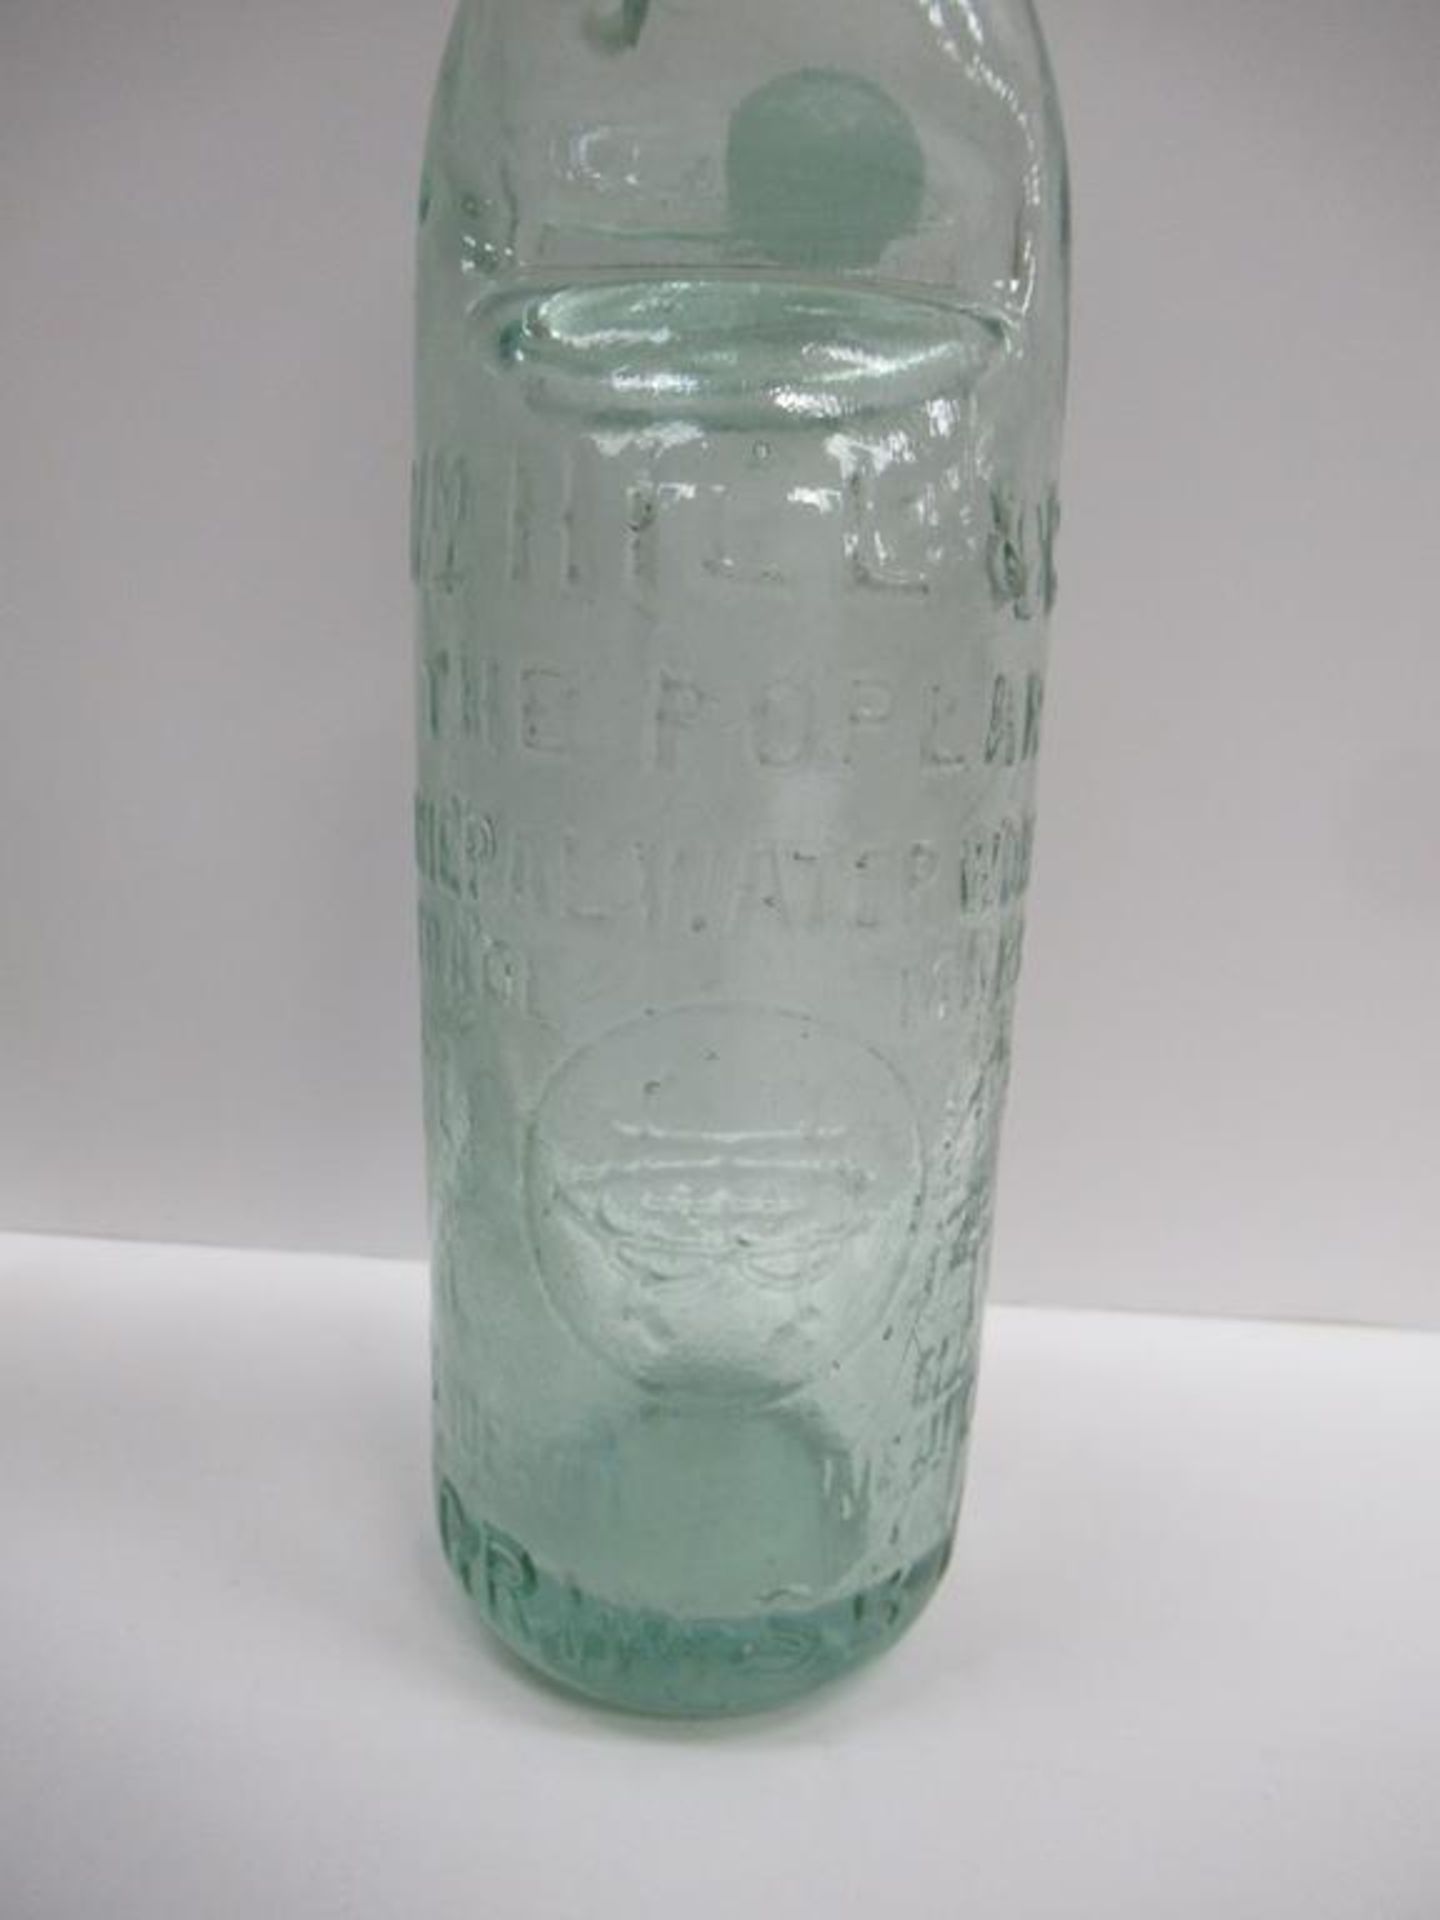 6x Grimsby W.M Hill & Co (4) and W. Hill & Son (2) Codd bottles - Image 18 of 21